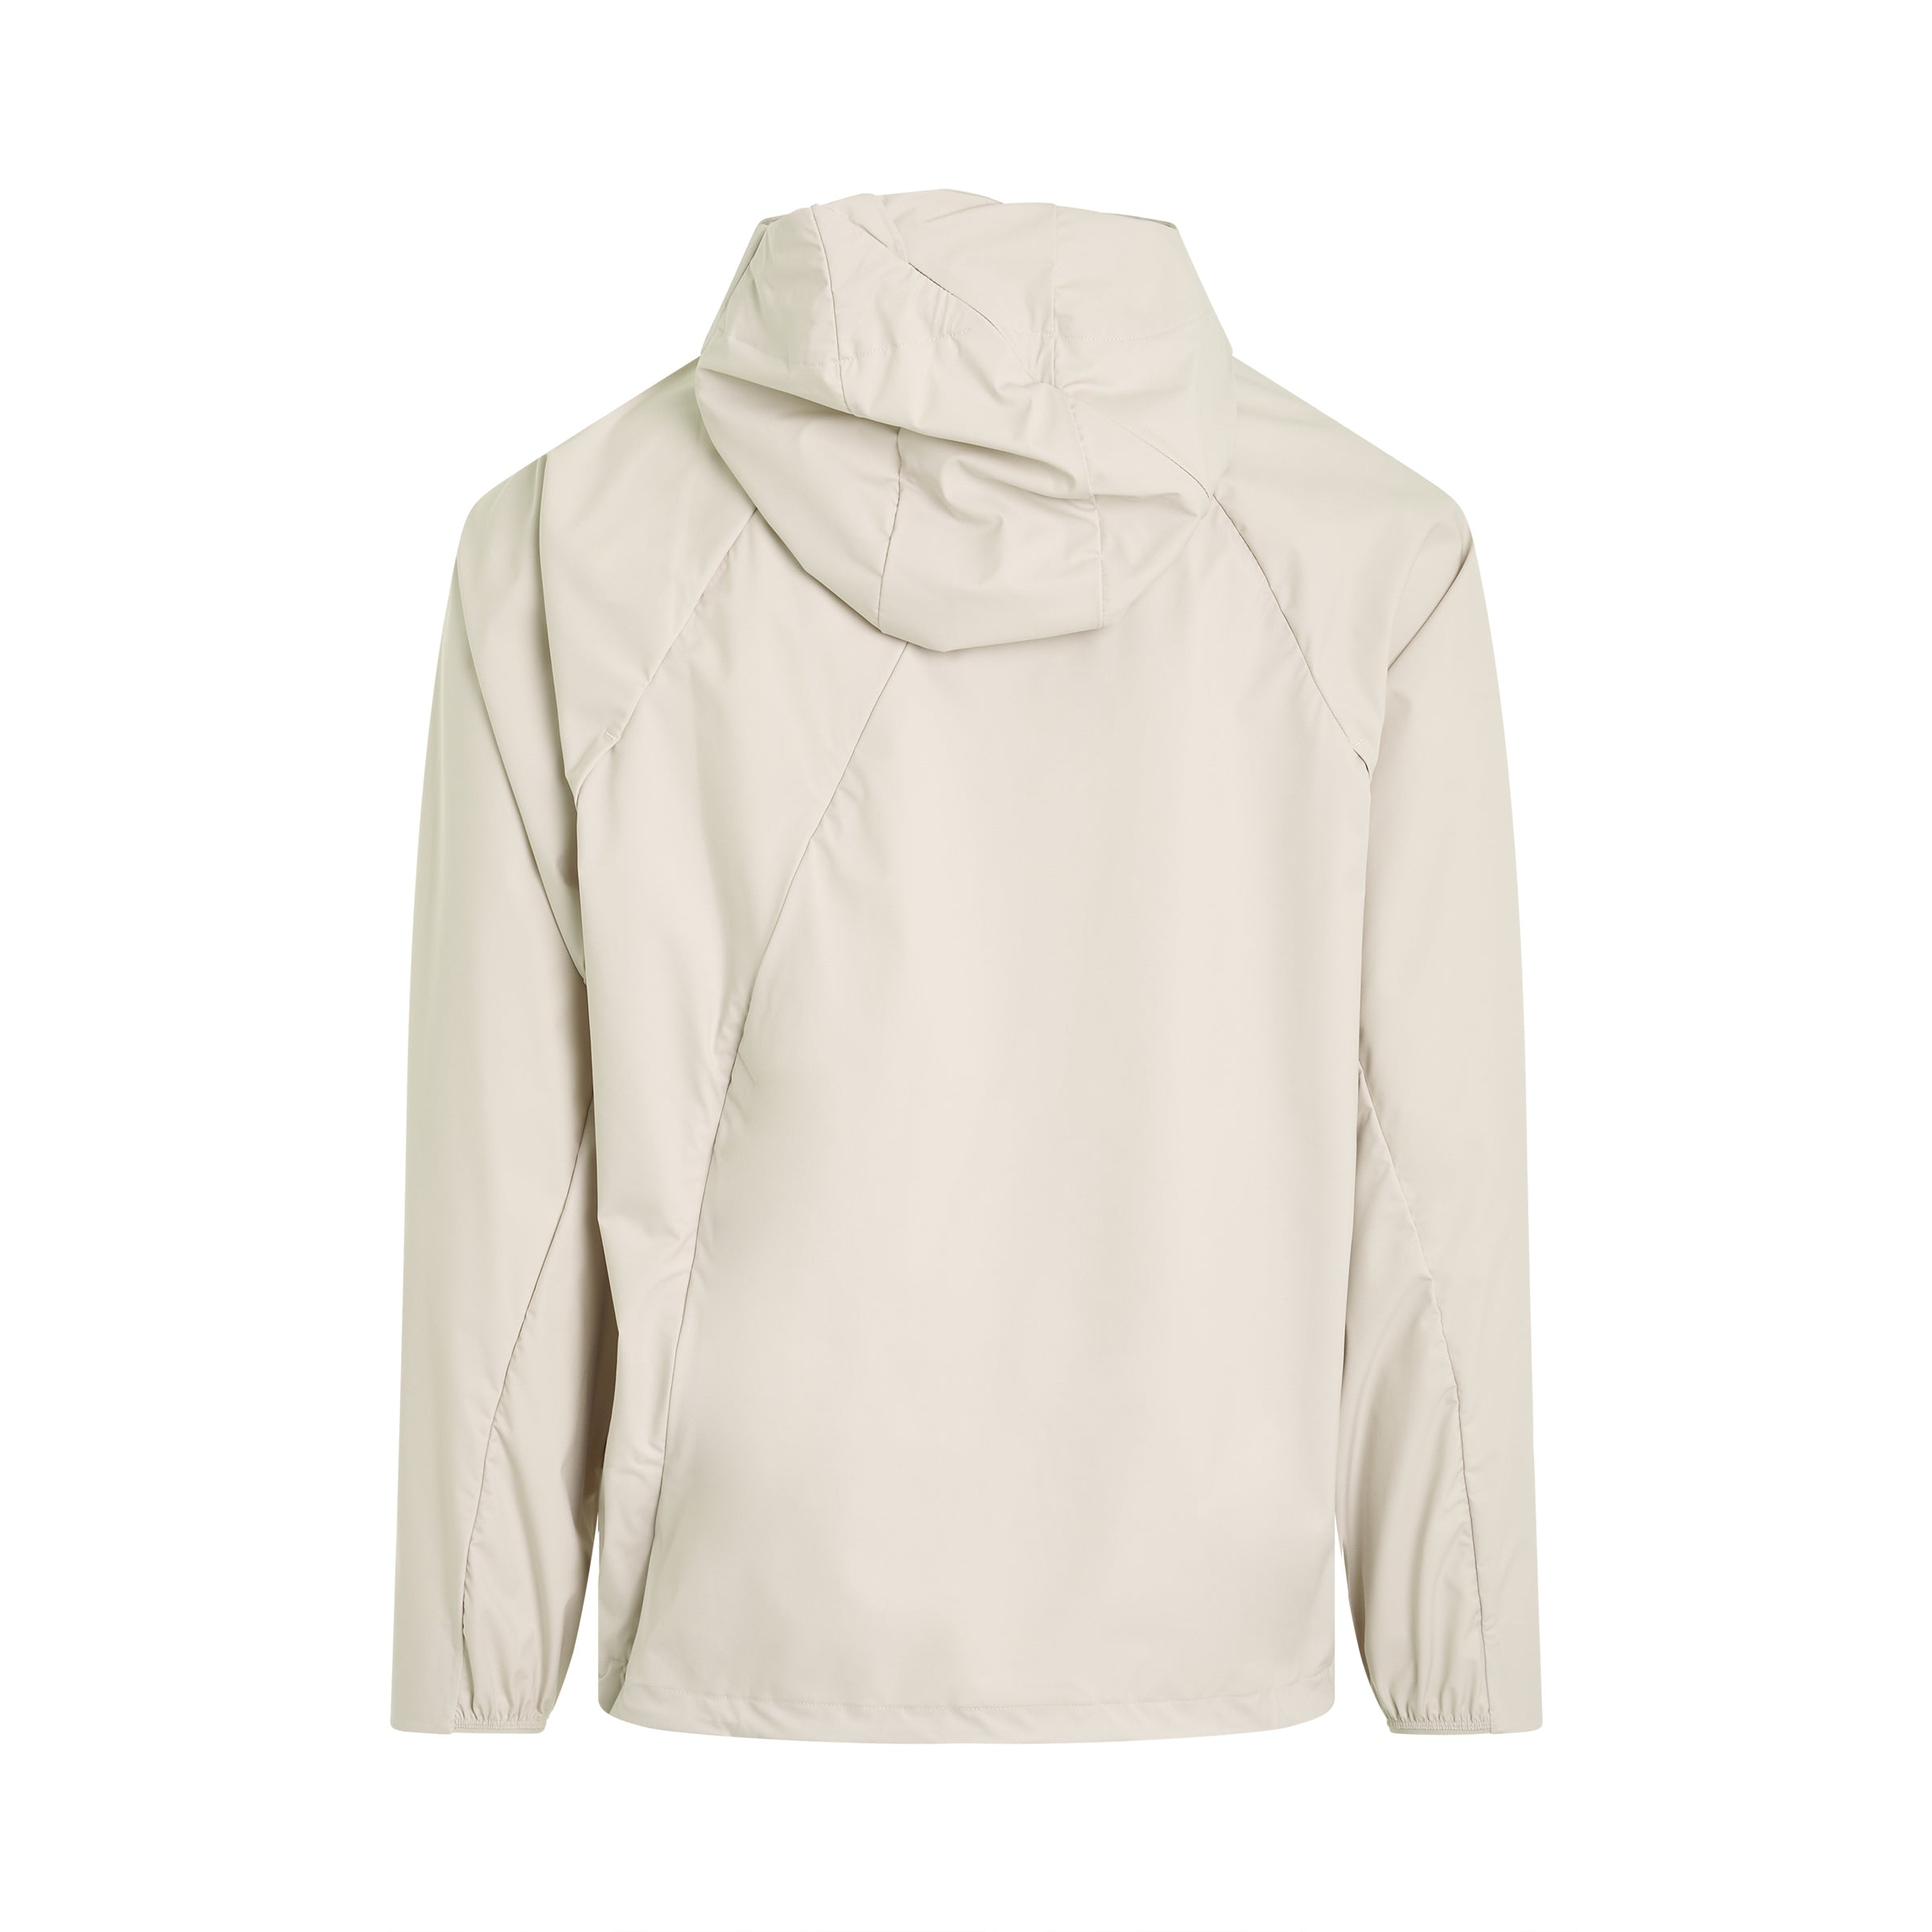 6.0 Technical Jacket (Center) in Ivory - 4